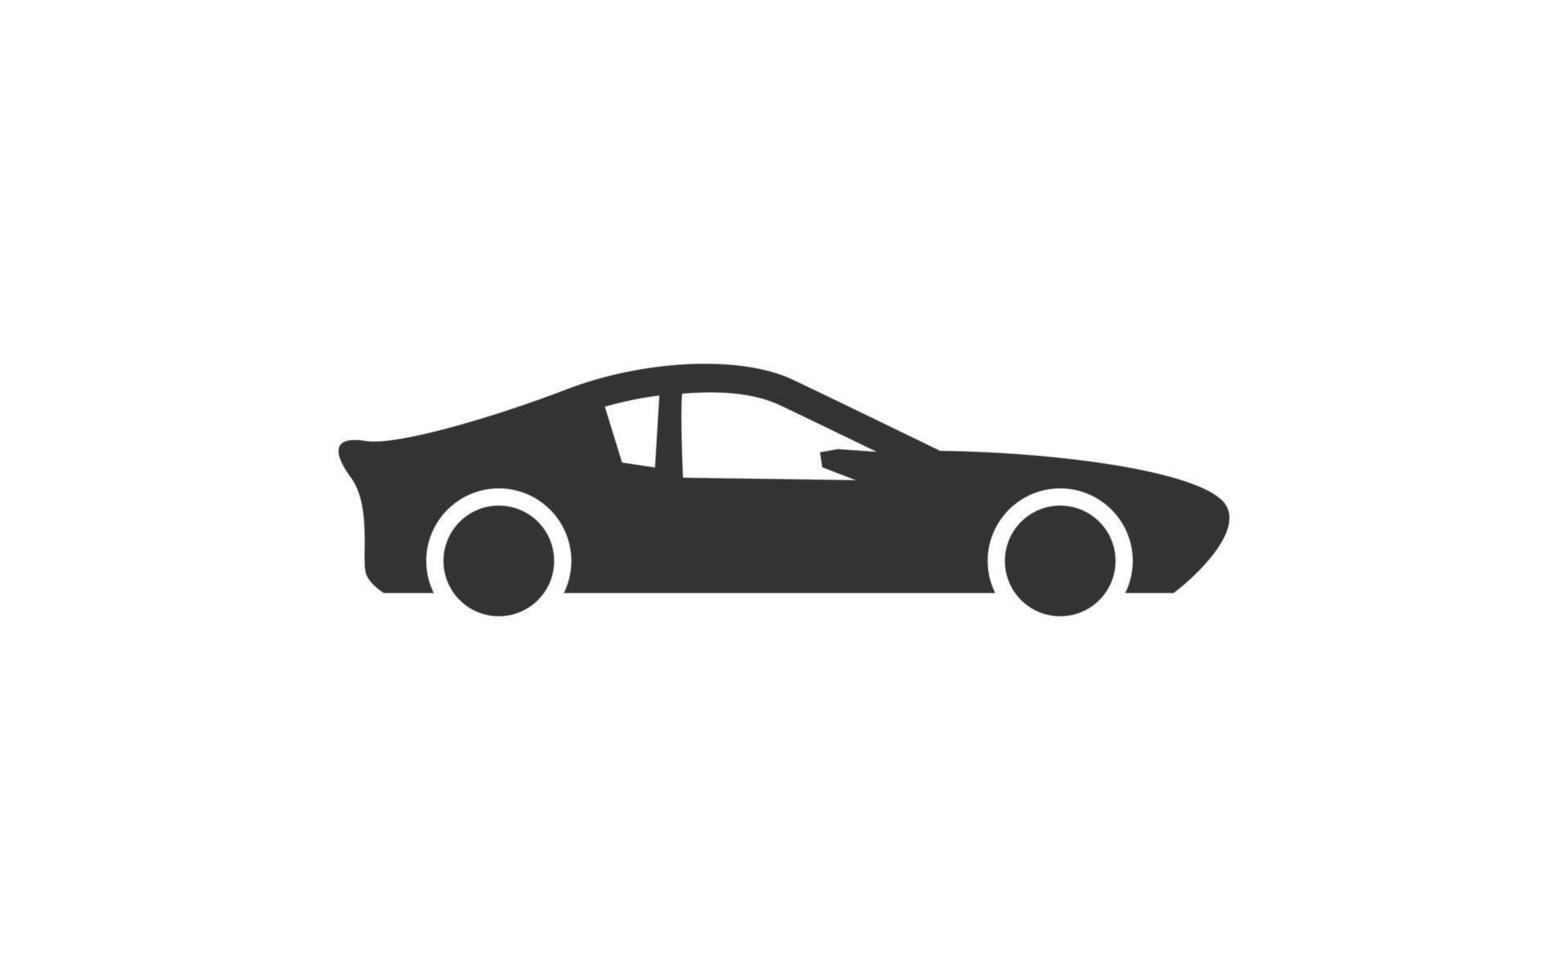 CAR icon logo for template vector with black color.